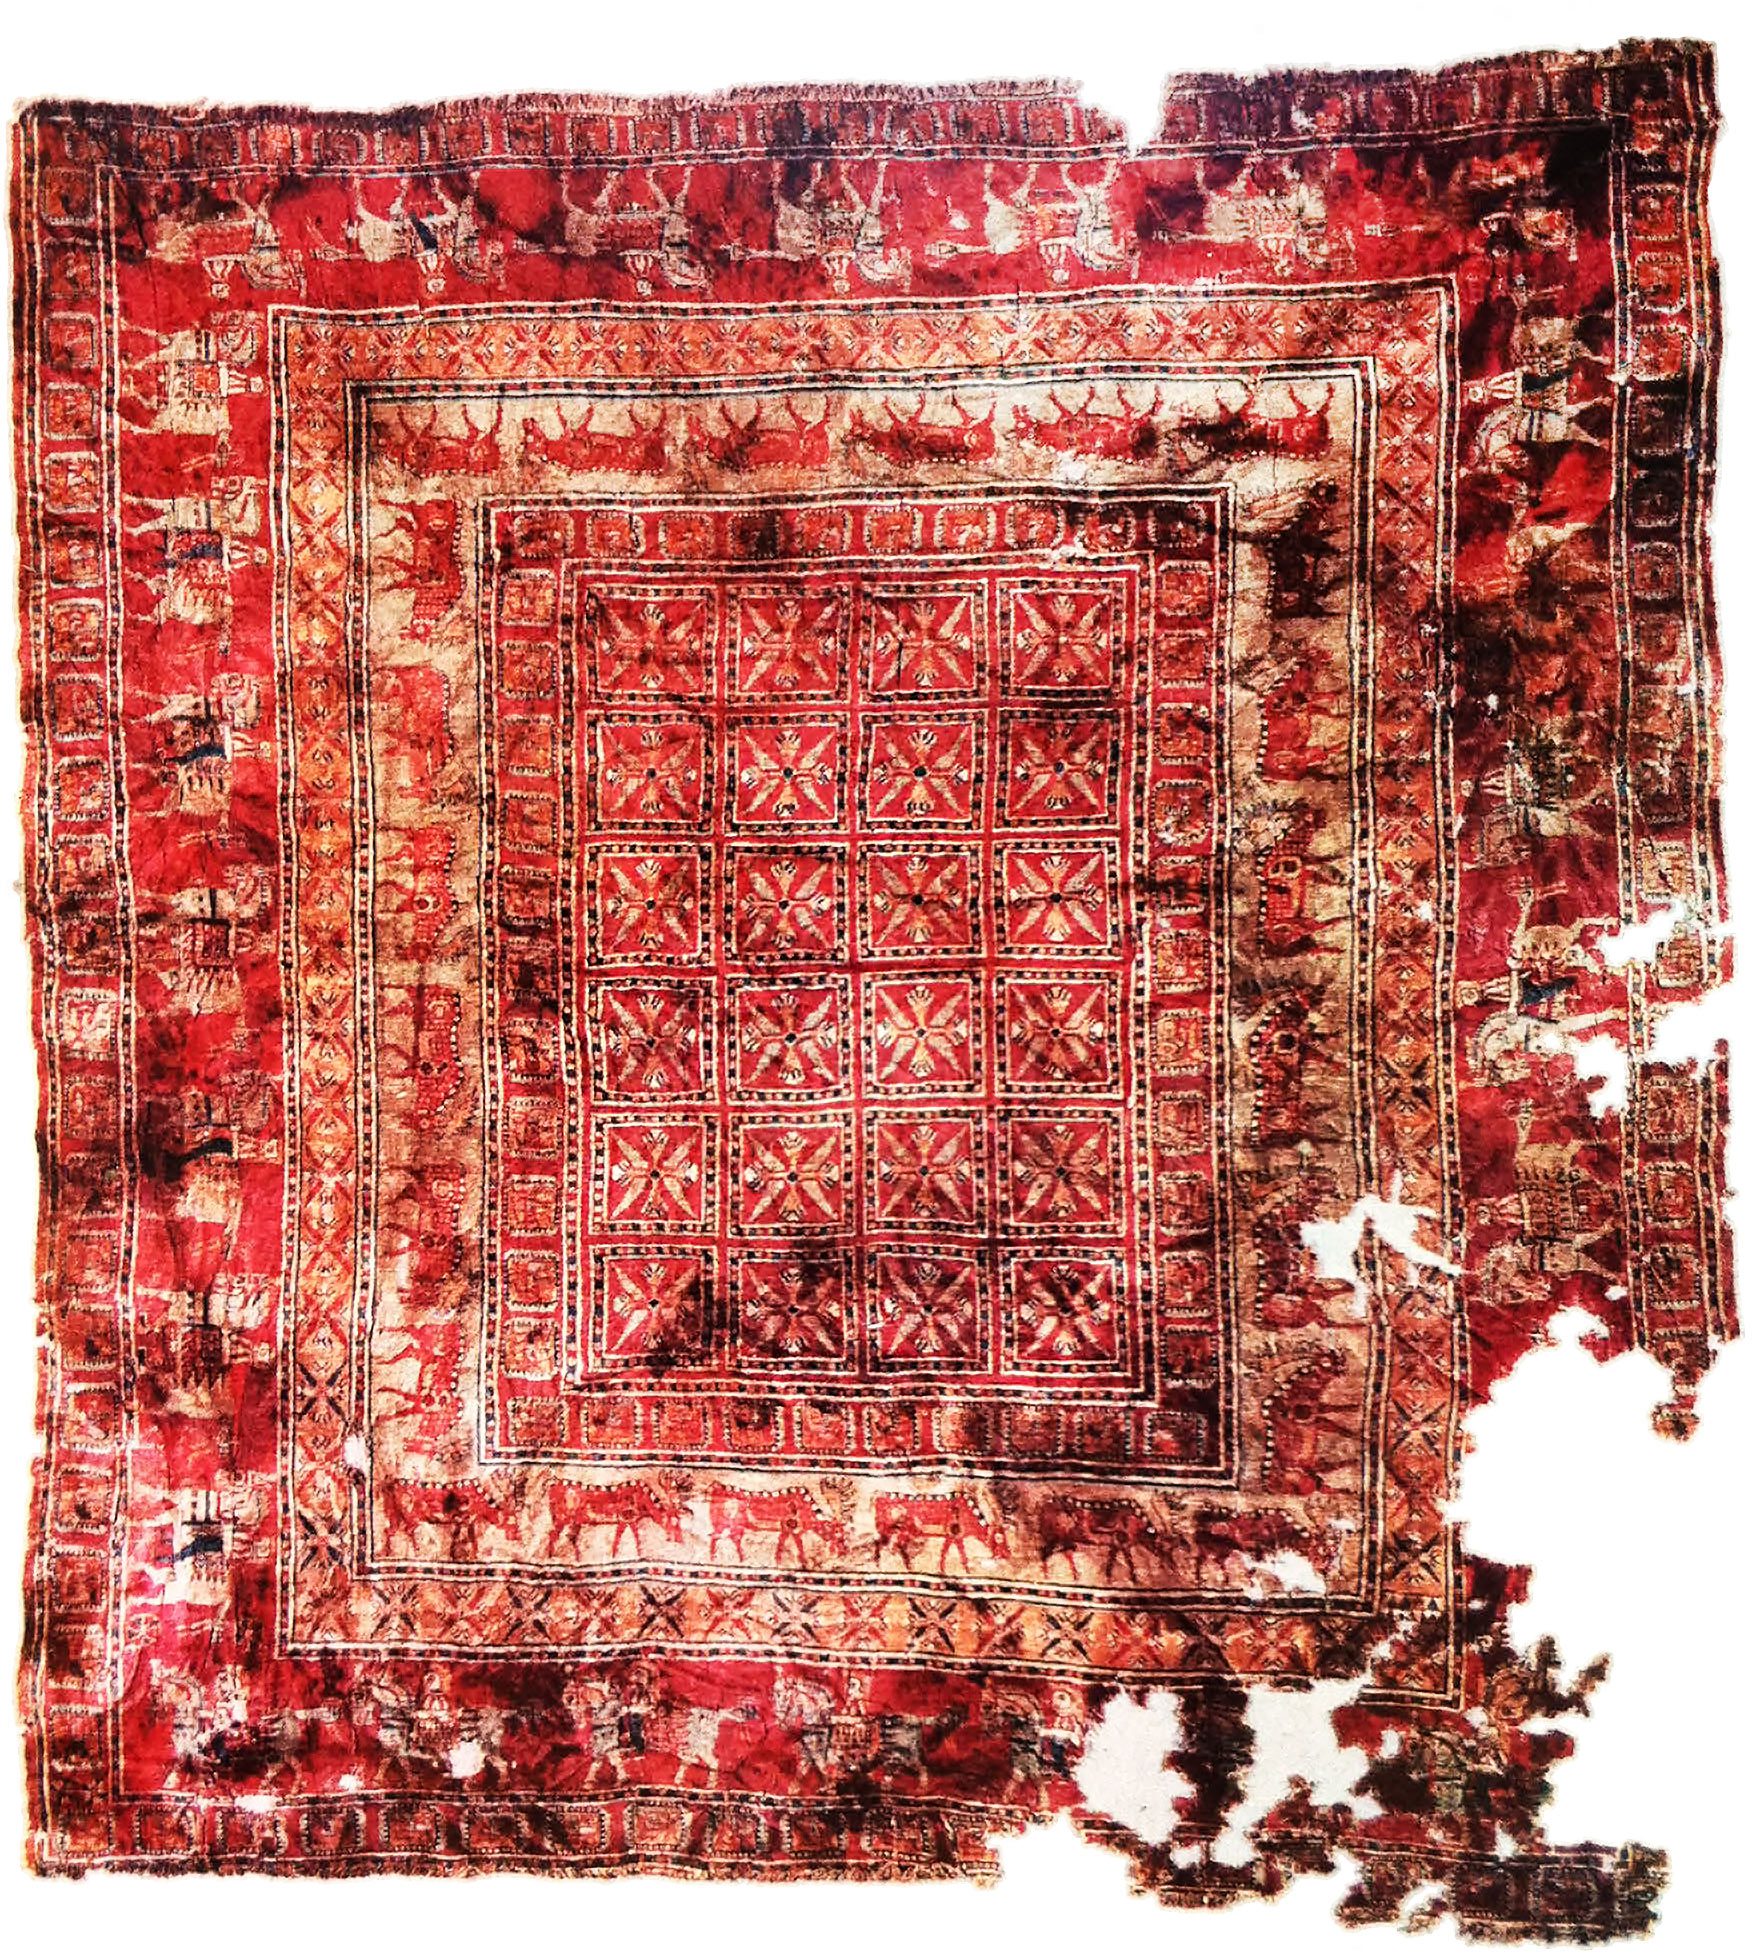 The Pazyryk Carpet Is The Oldest Known Carpet On Earth